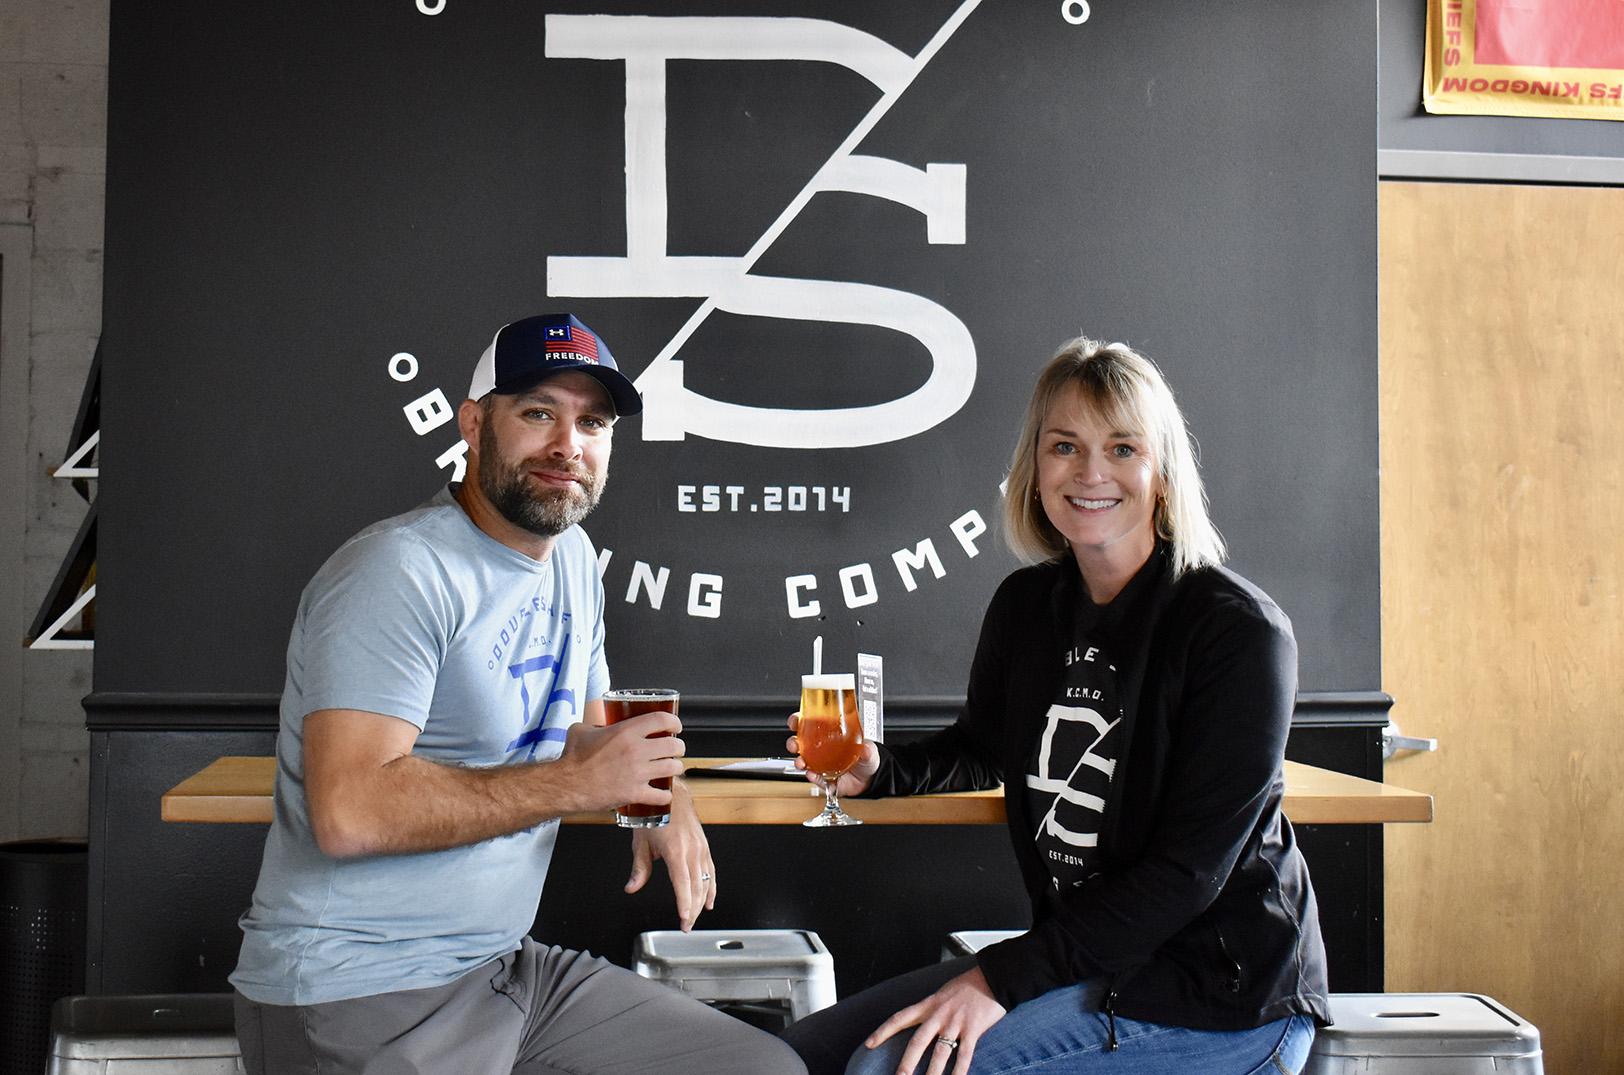 Veteran brewer pulling double shift with purchase of neighboring Crossroads taphouse, brewery